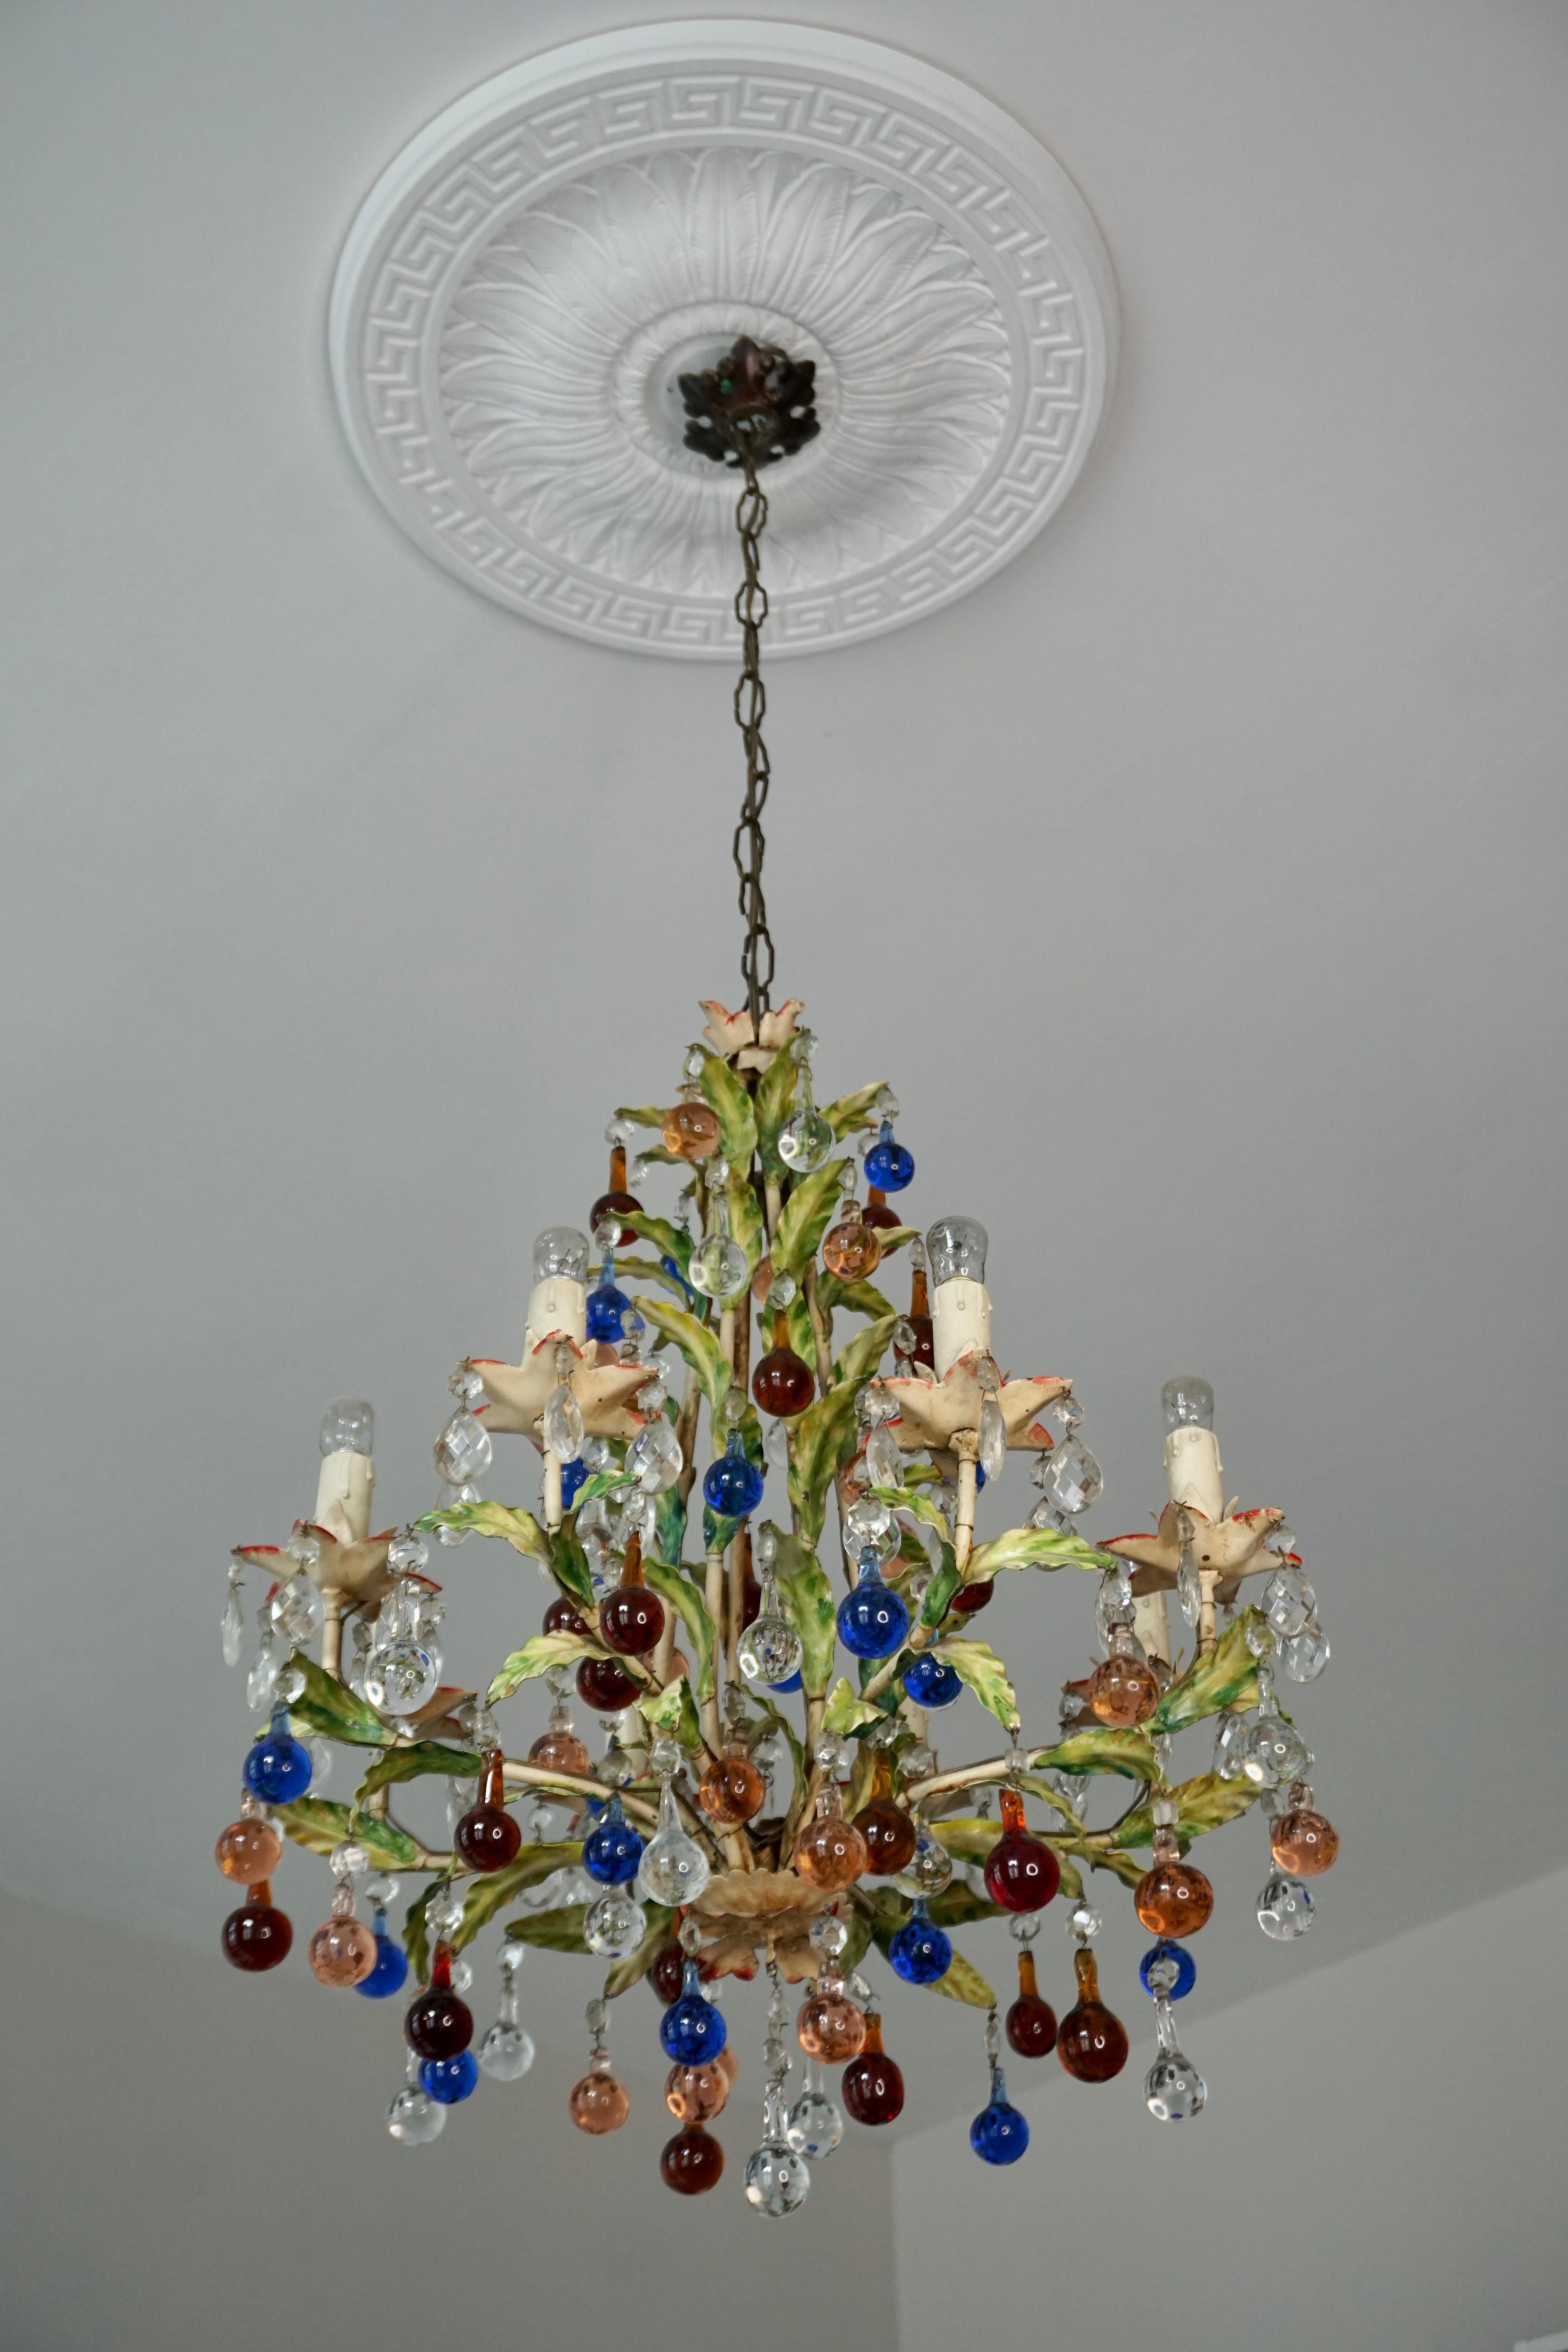 Stunning chandelier with multicolored Murano glass.Manufactured in the 1950-1960s in Italy.

Italian Venetian gilt metal 8-light chandelier with Murano glass from the mid 20th Century. This impressive and beautiful Italian Hollywood Regency-style